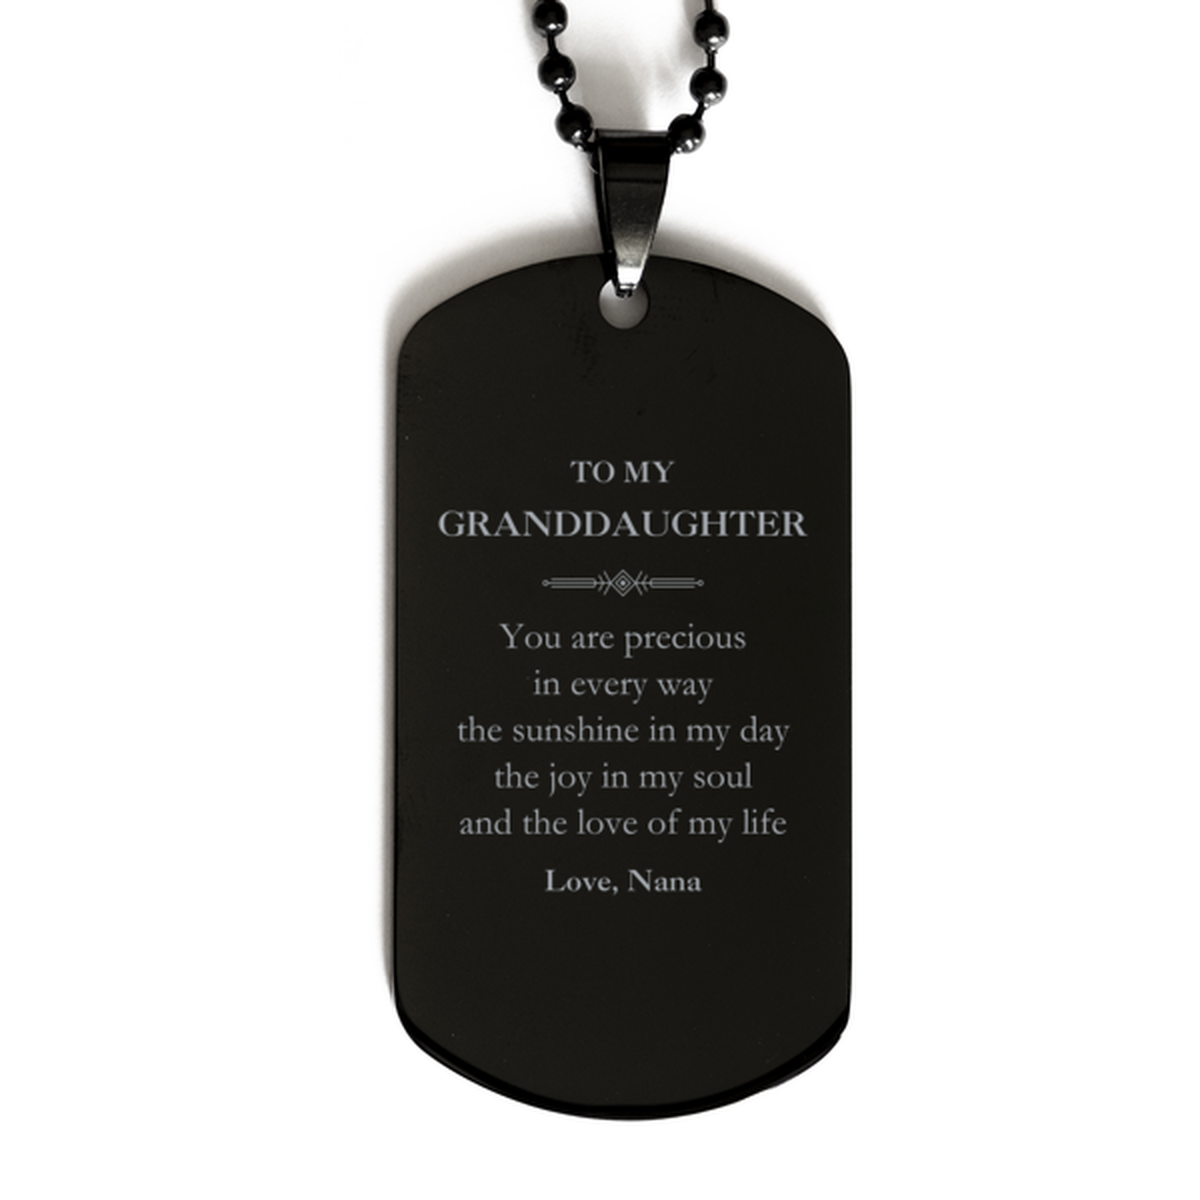 Graduation Gifts for Granddaughter Black Dog Tag Present from Nana, Christmas Granddaughter Birthday Gifts Granddaughter You are precious in every way the sunshine in my day. Love, Nana